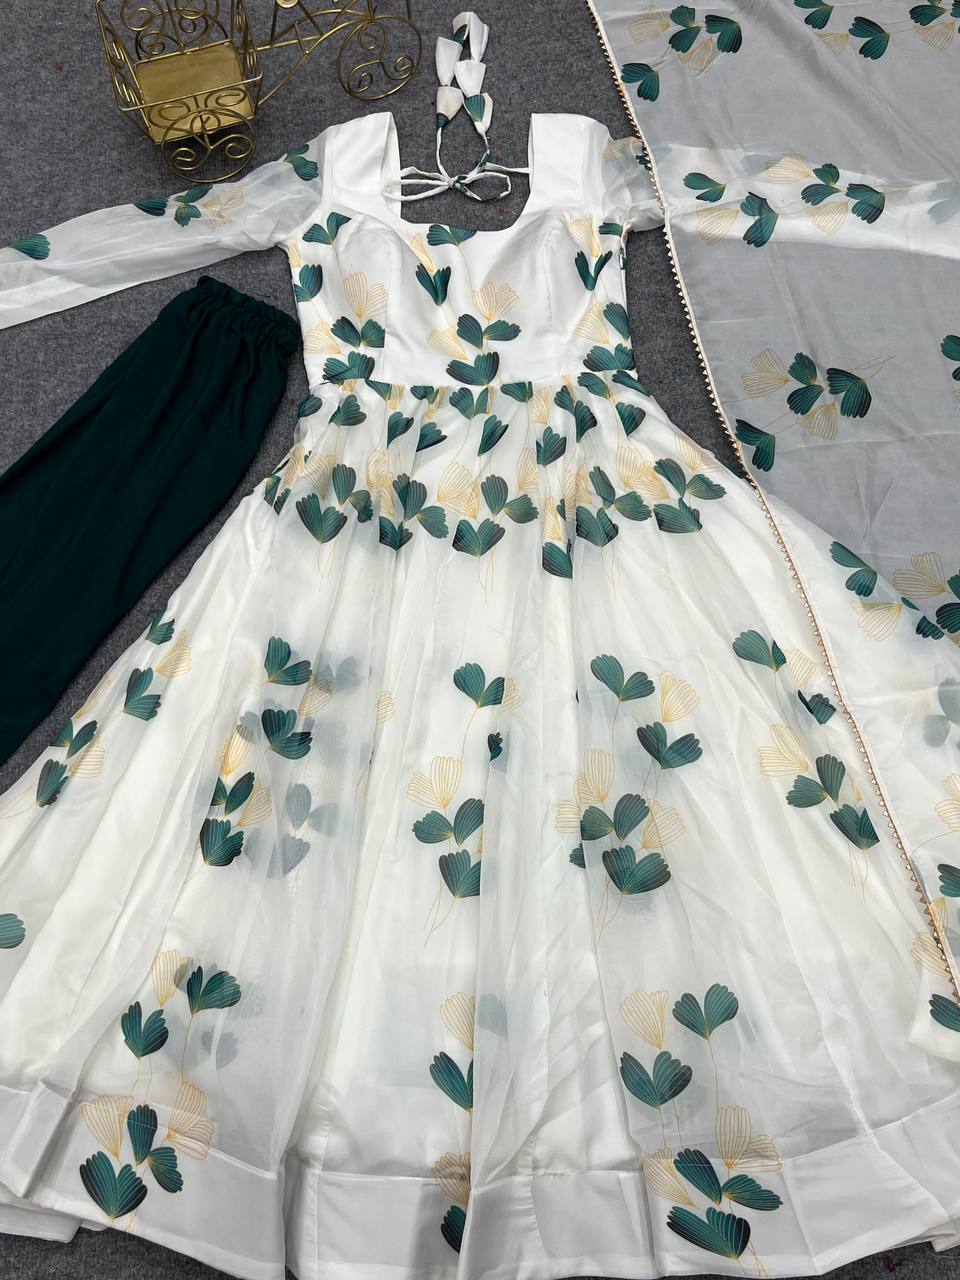 Buy White Anarkali online at Best Prices in India